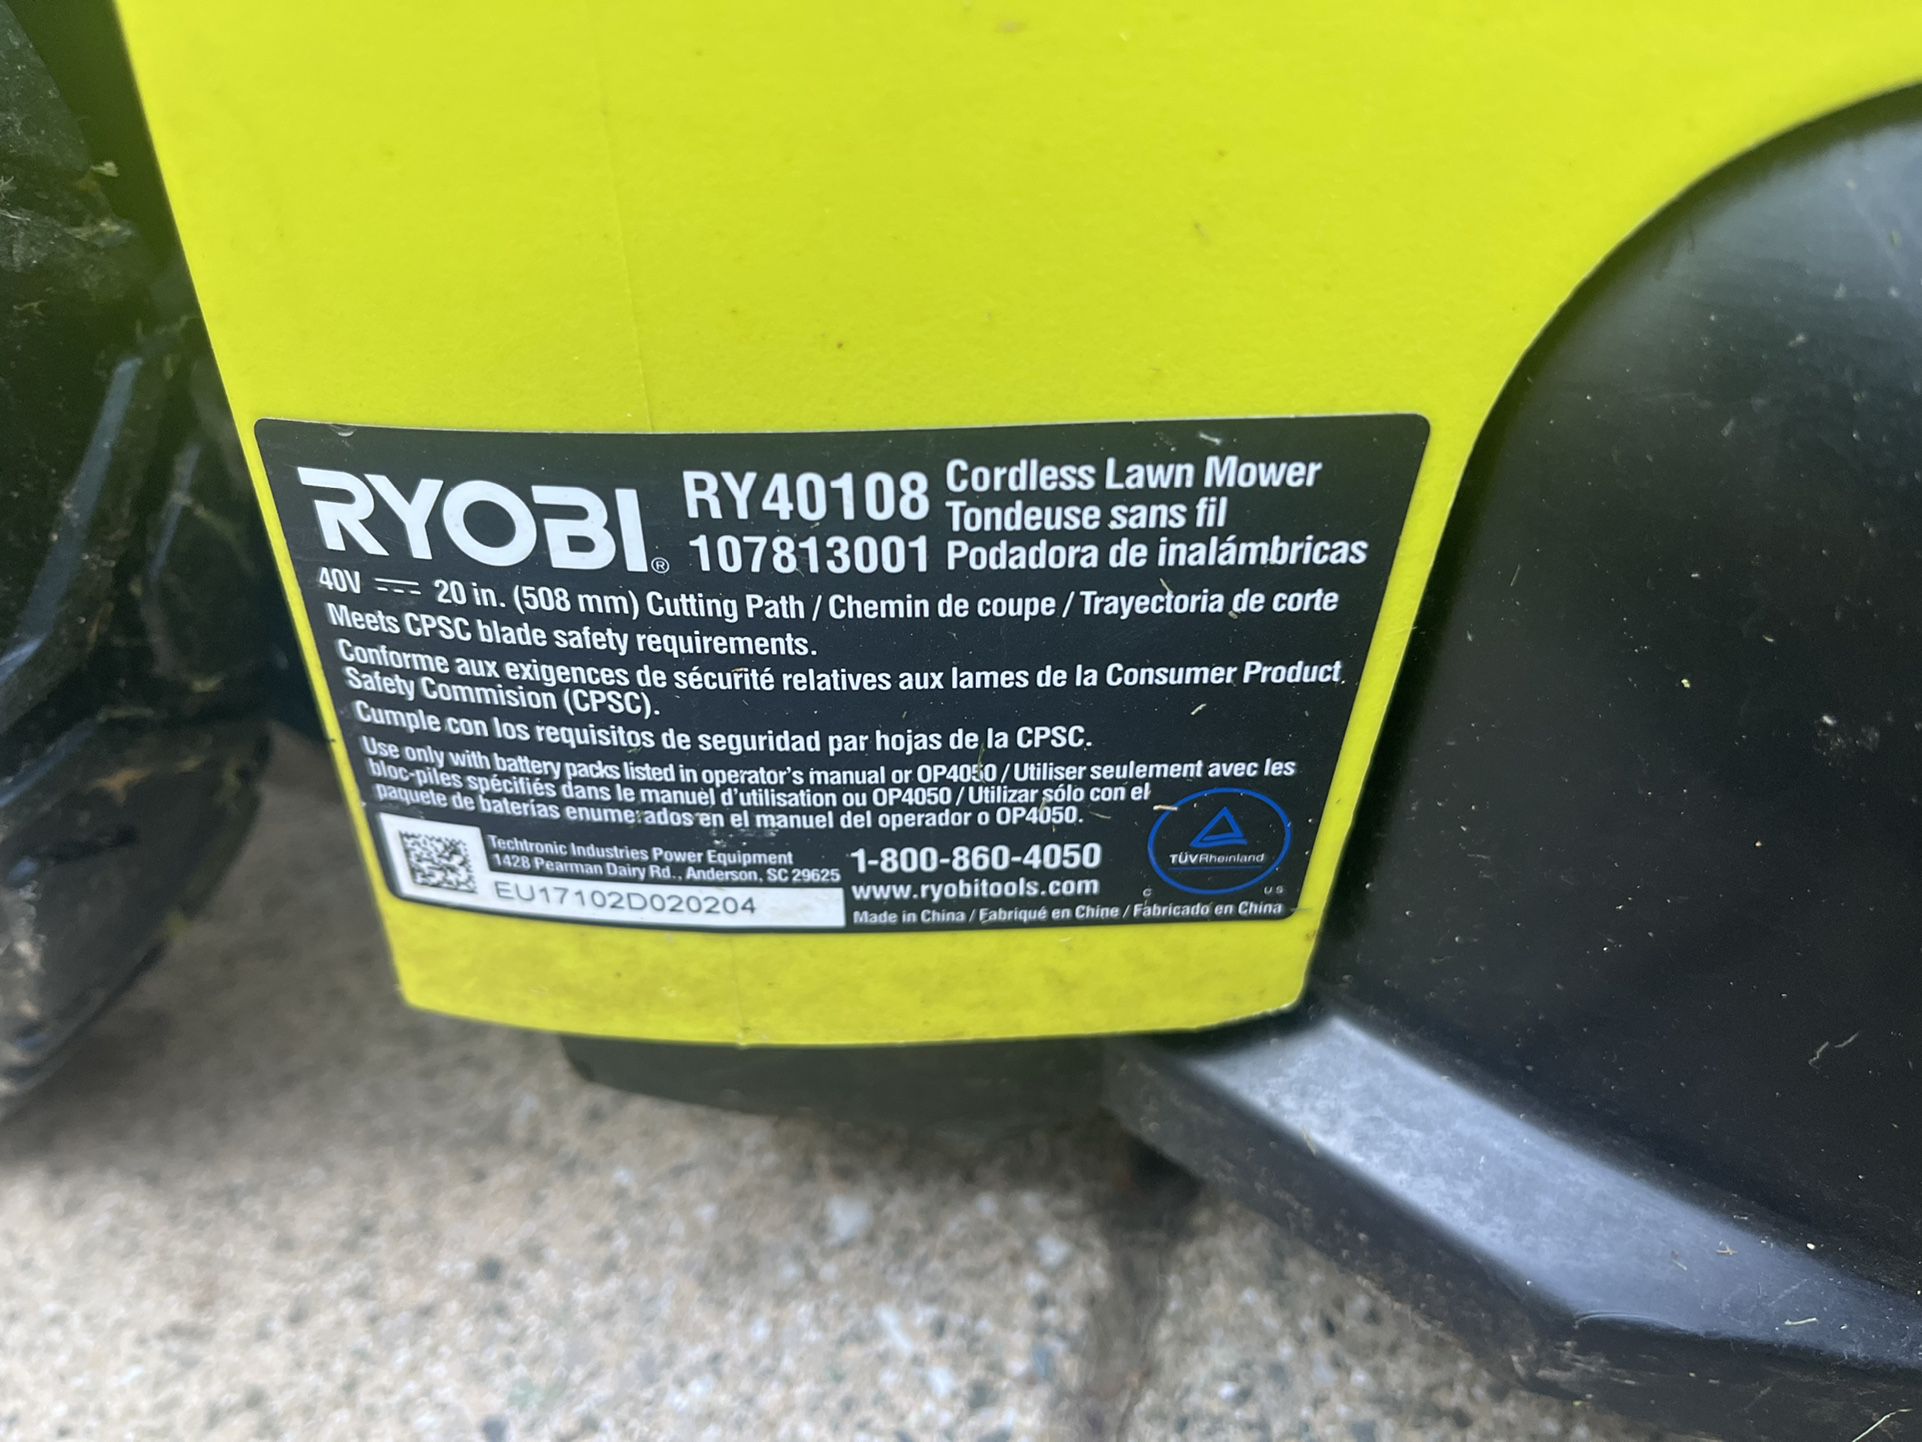 https://storables.com/wp-content/uploads/2023/09/where-is-the-serial-number-on-ryobi-tools-1694320484.jpg